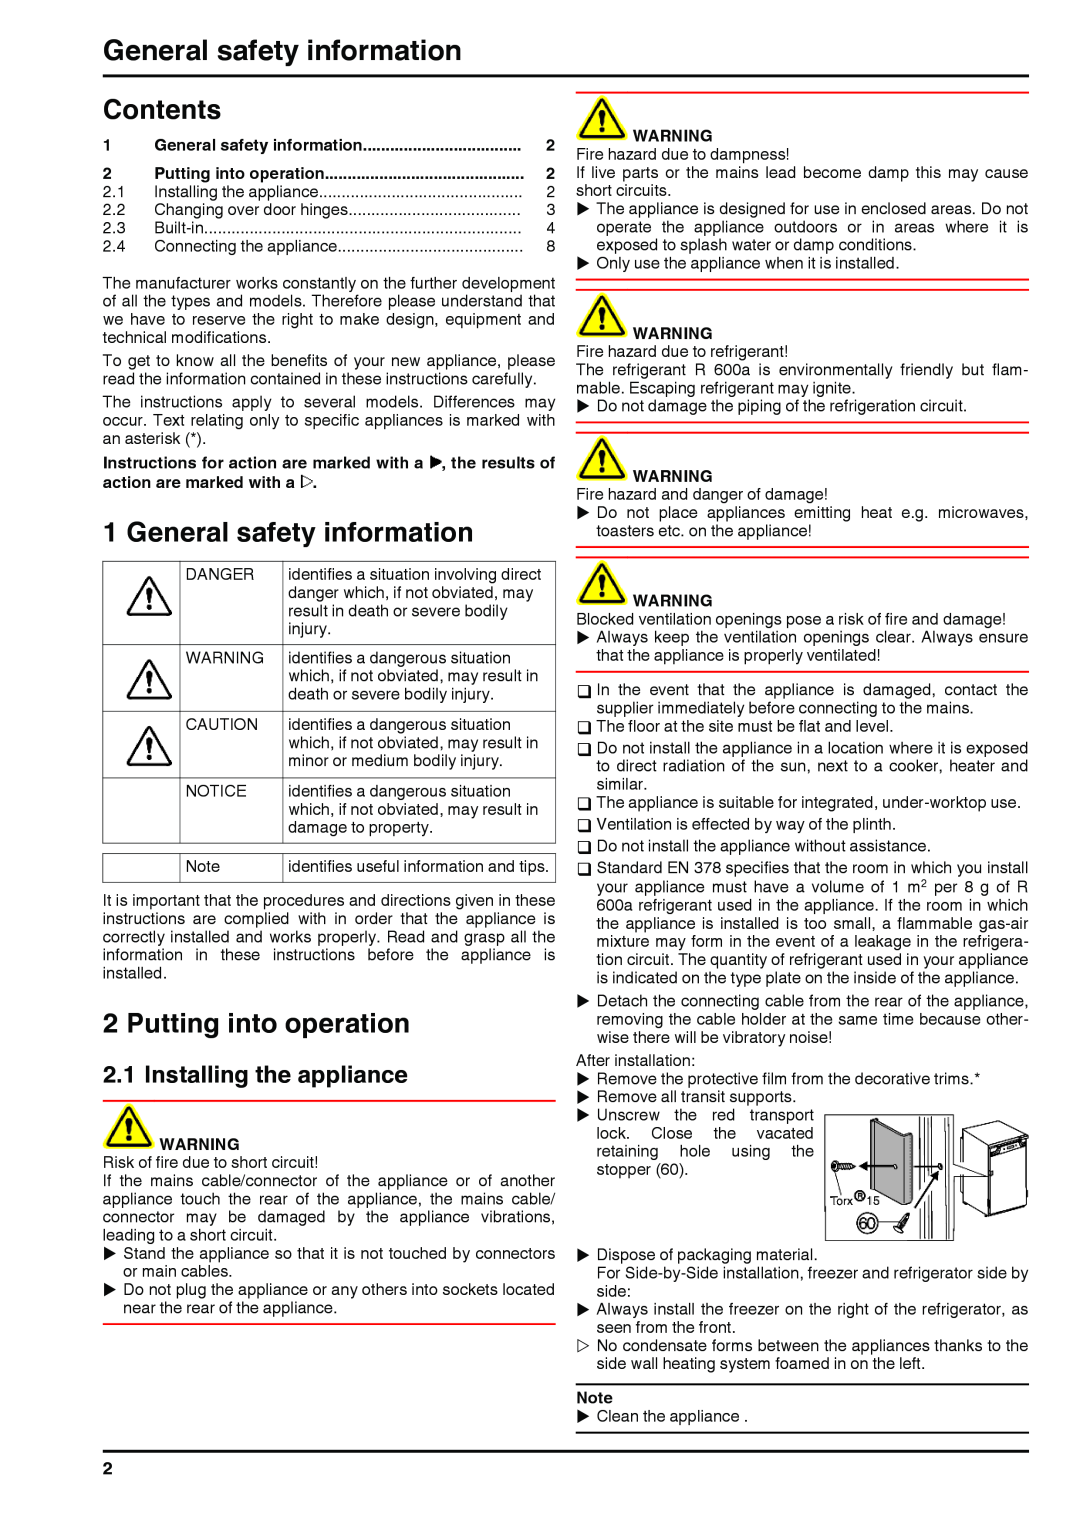 Liebherr 211111 7085270 - 00 General safety information, Installing the appliance, Putting into operation, Contents 